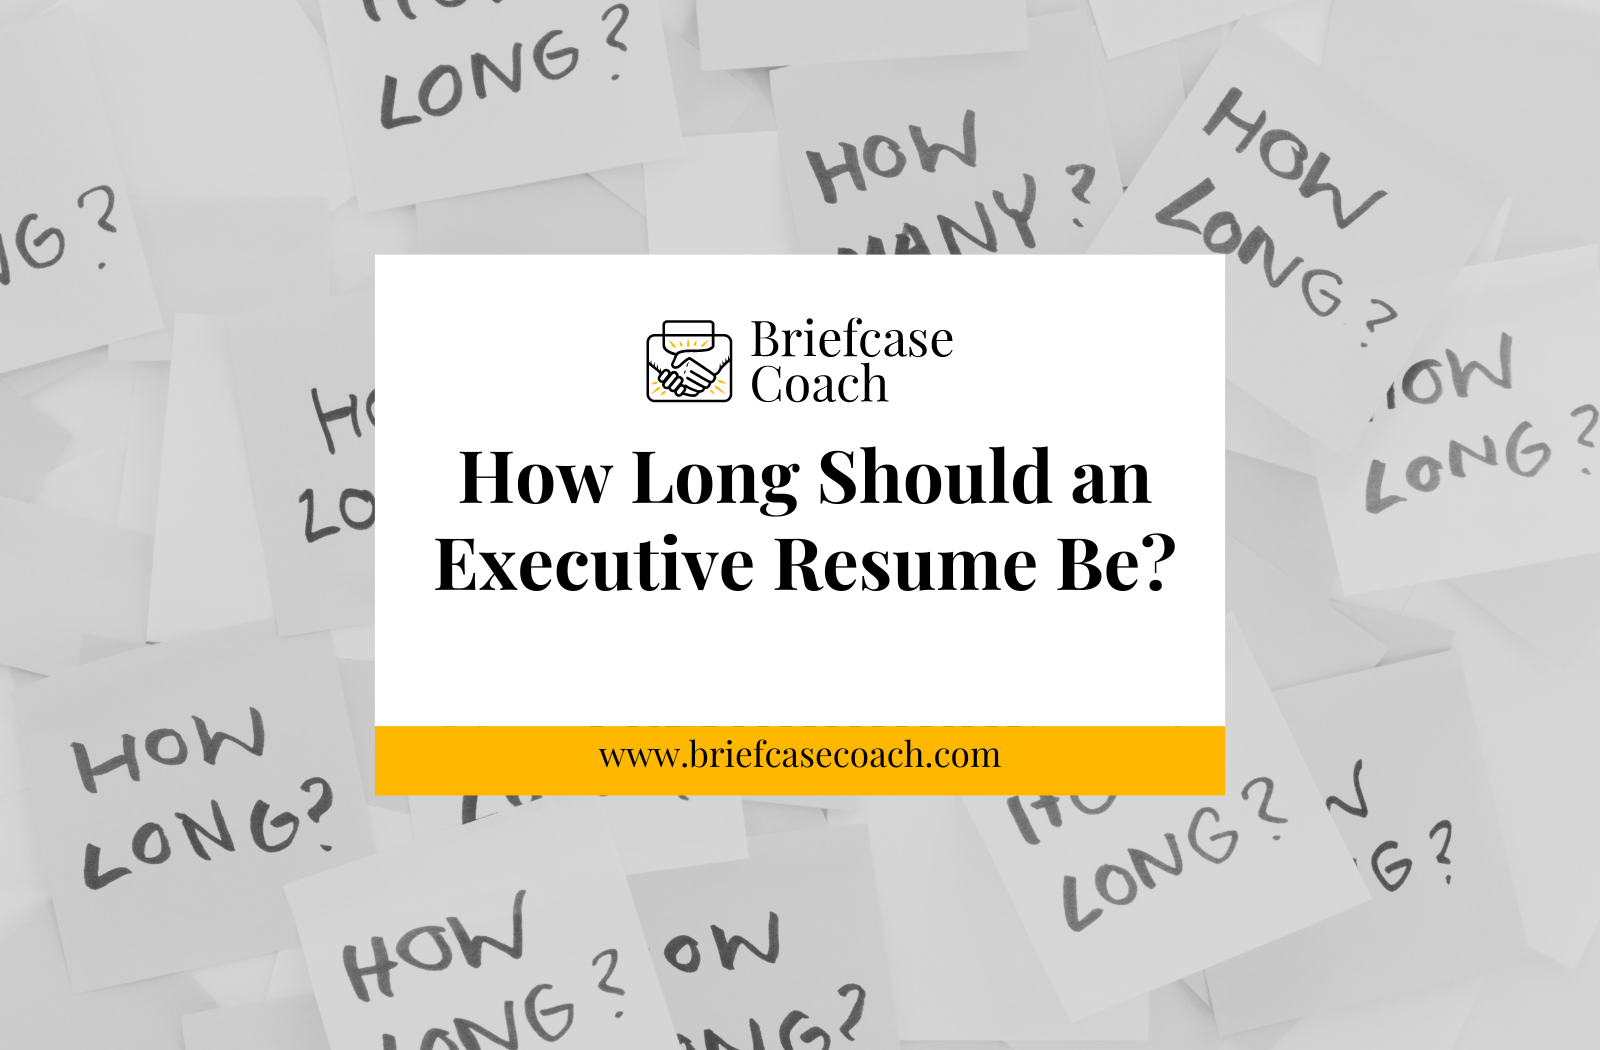 How Long Should an Executive Resume Be?